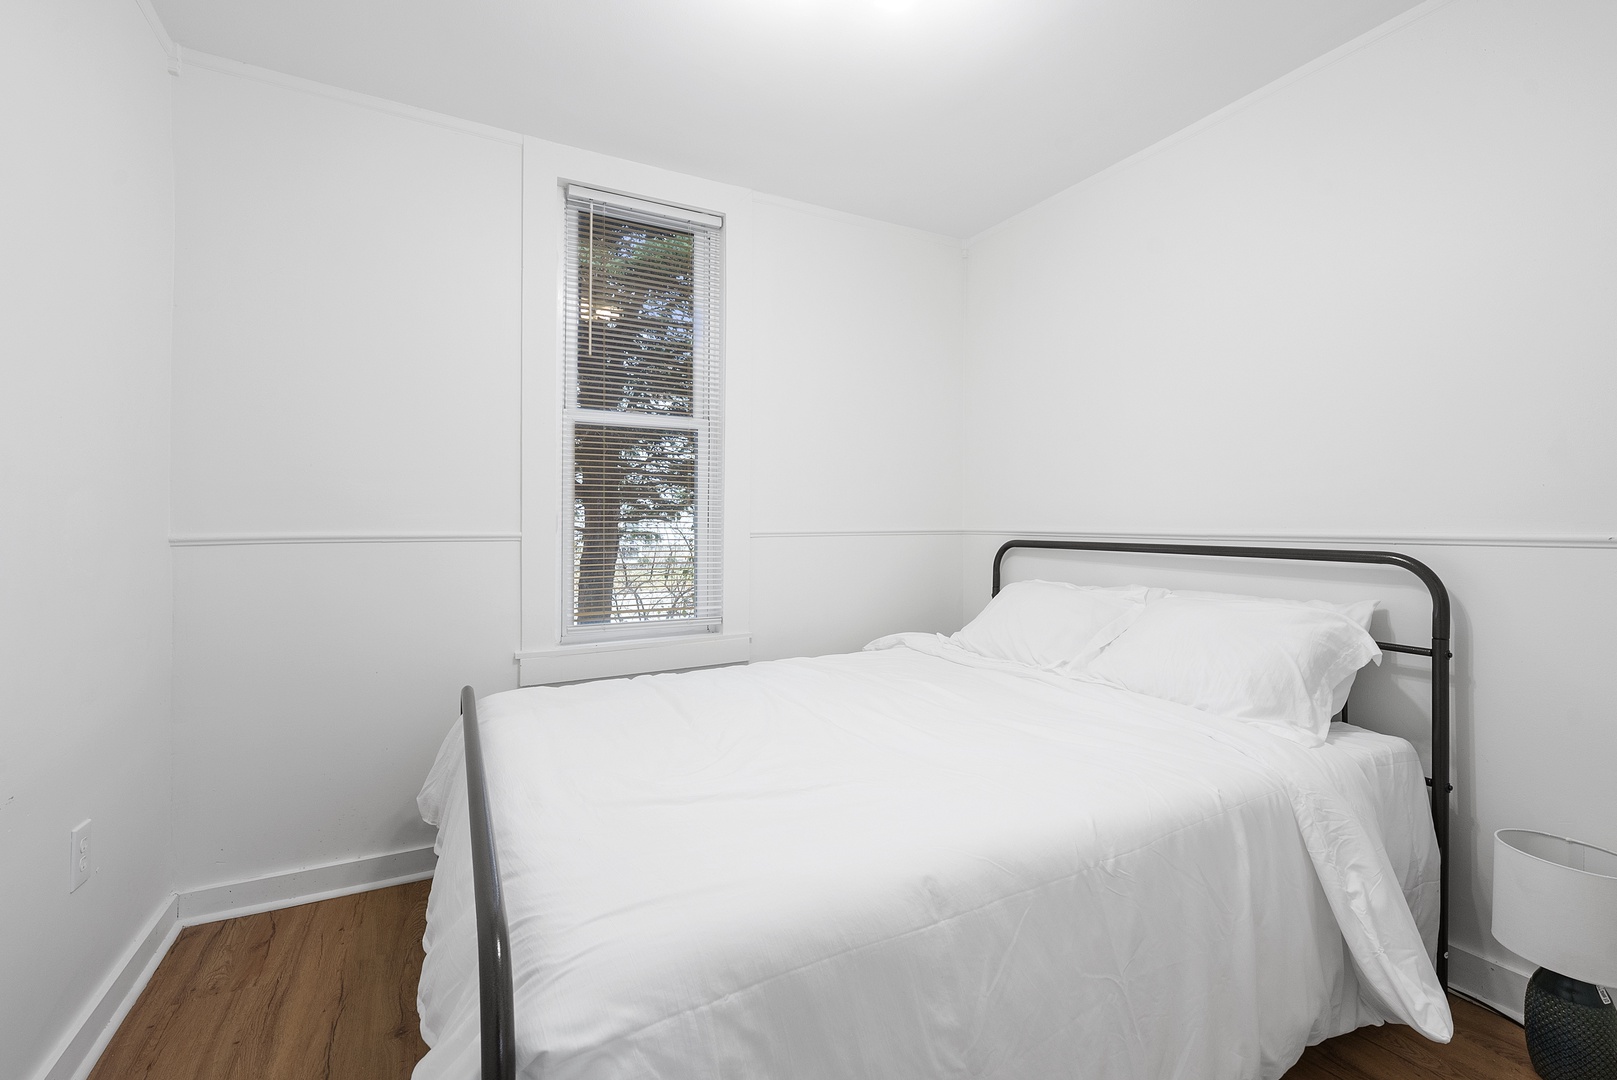 This 1st floor bedroom retreat offers a plush queen-sized bed